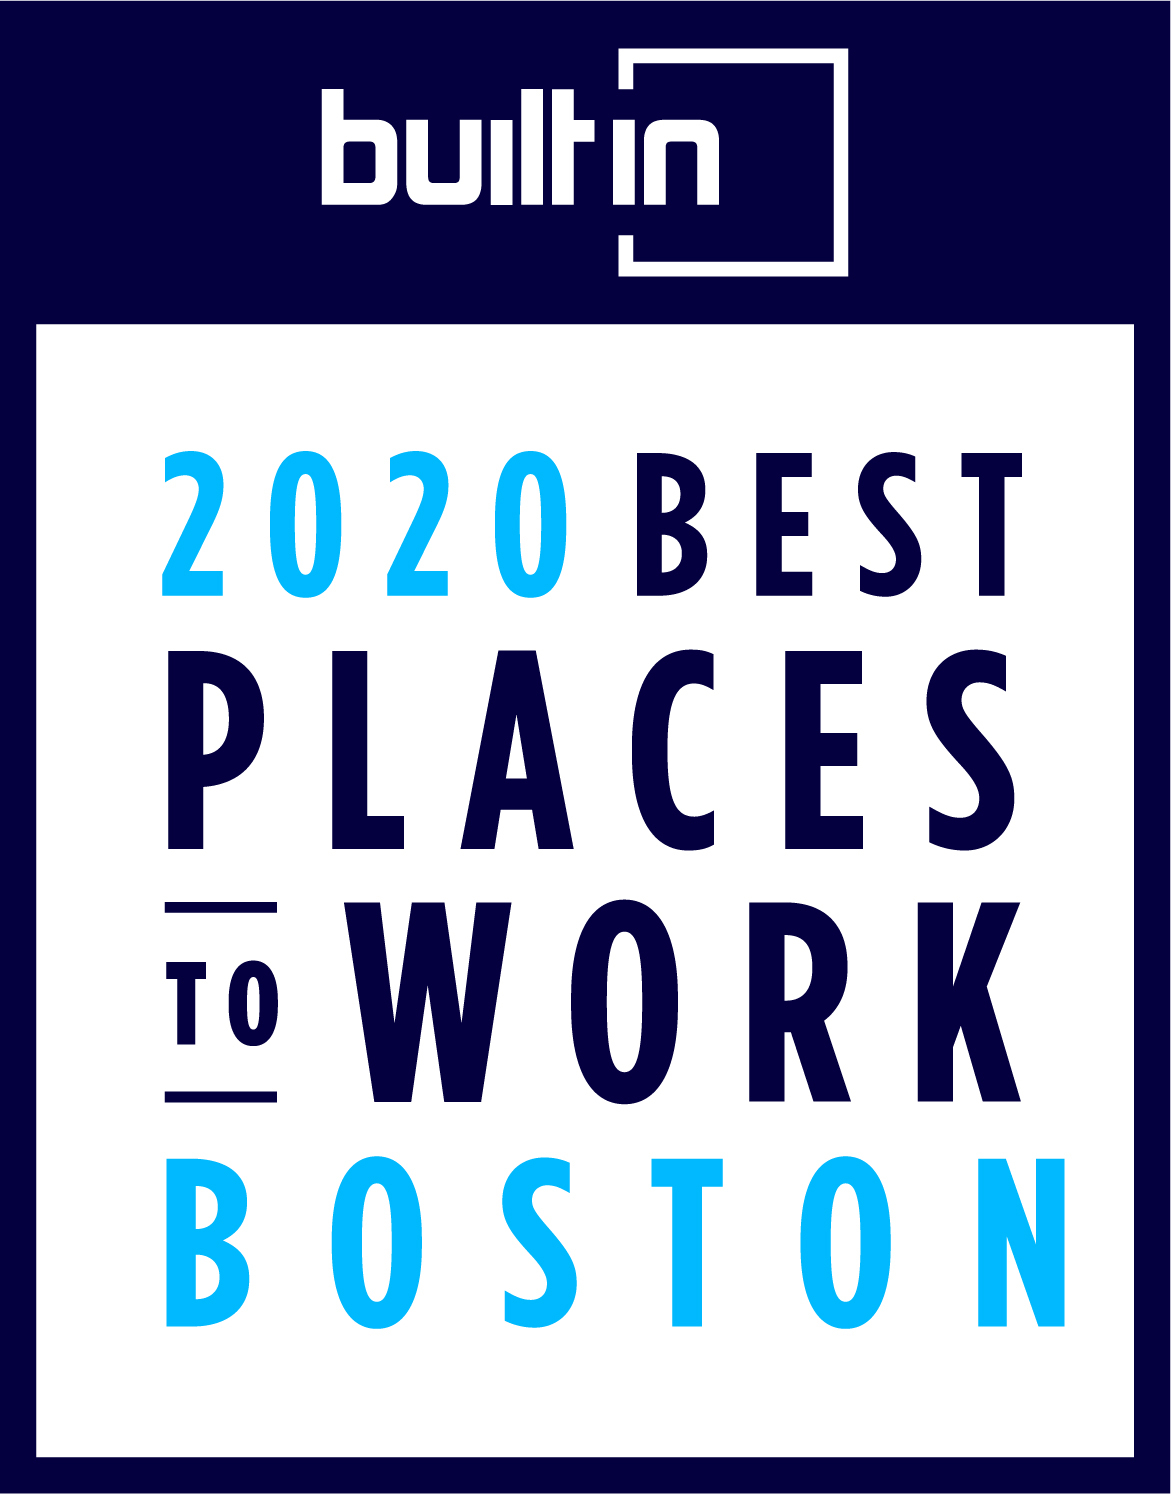 Built in Boston Best Places to Work (Overall 2020)